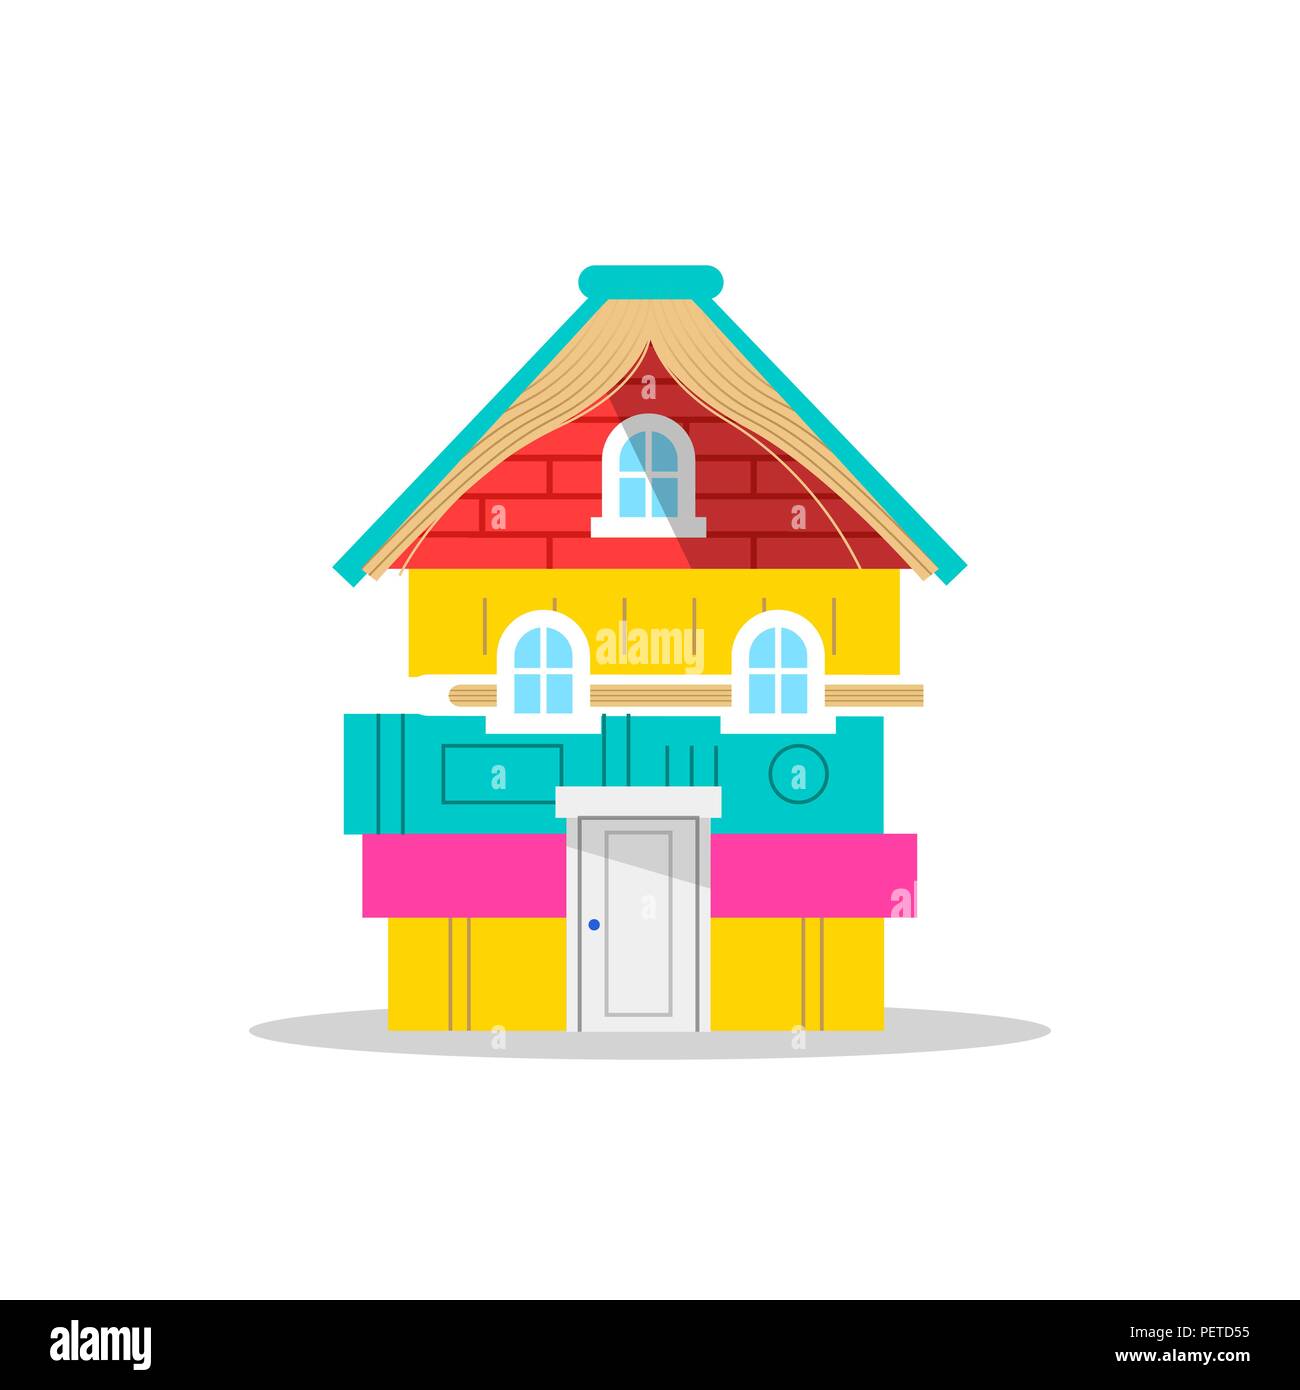 House made of colorful children books on isolated white background, concept illustration for kids imagination or school education. EPS10 vector. Stock Vector